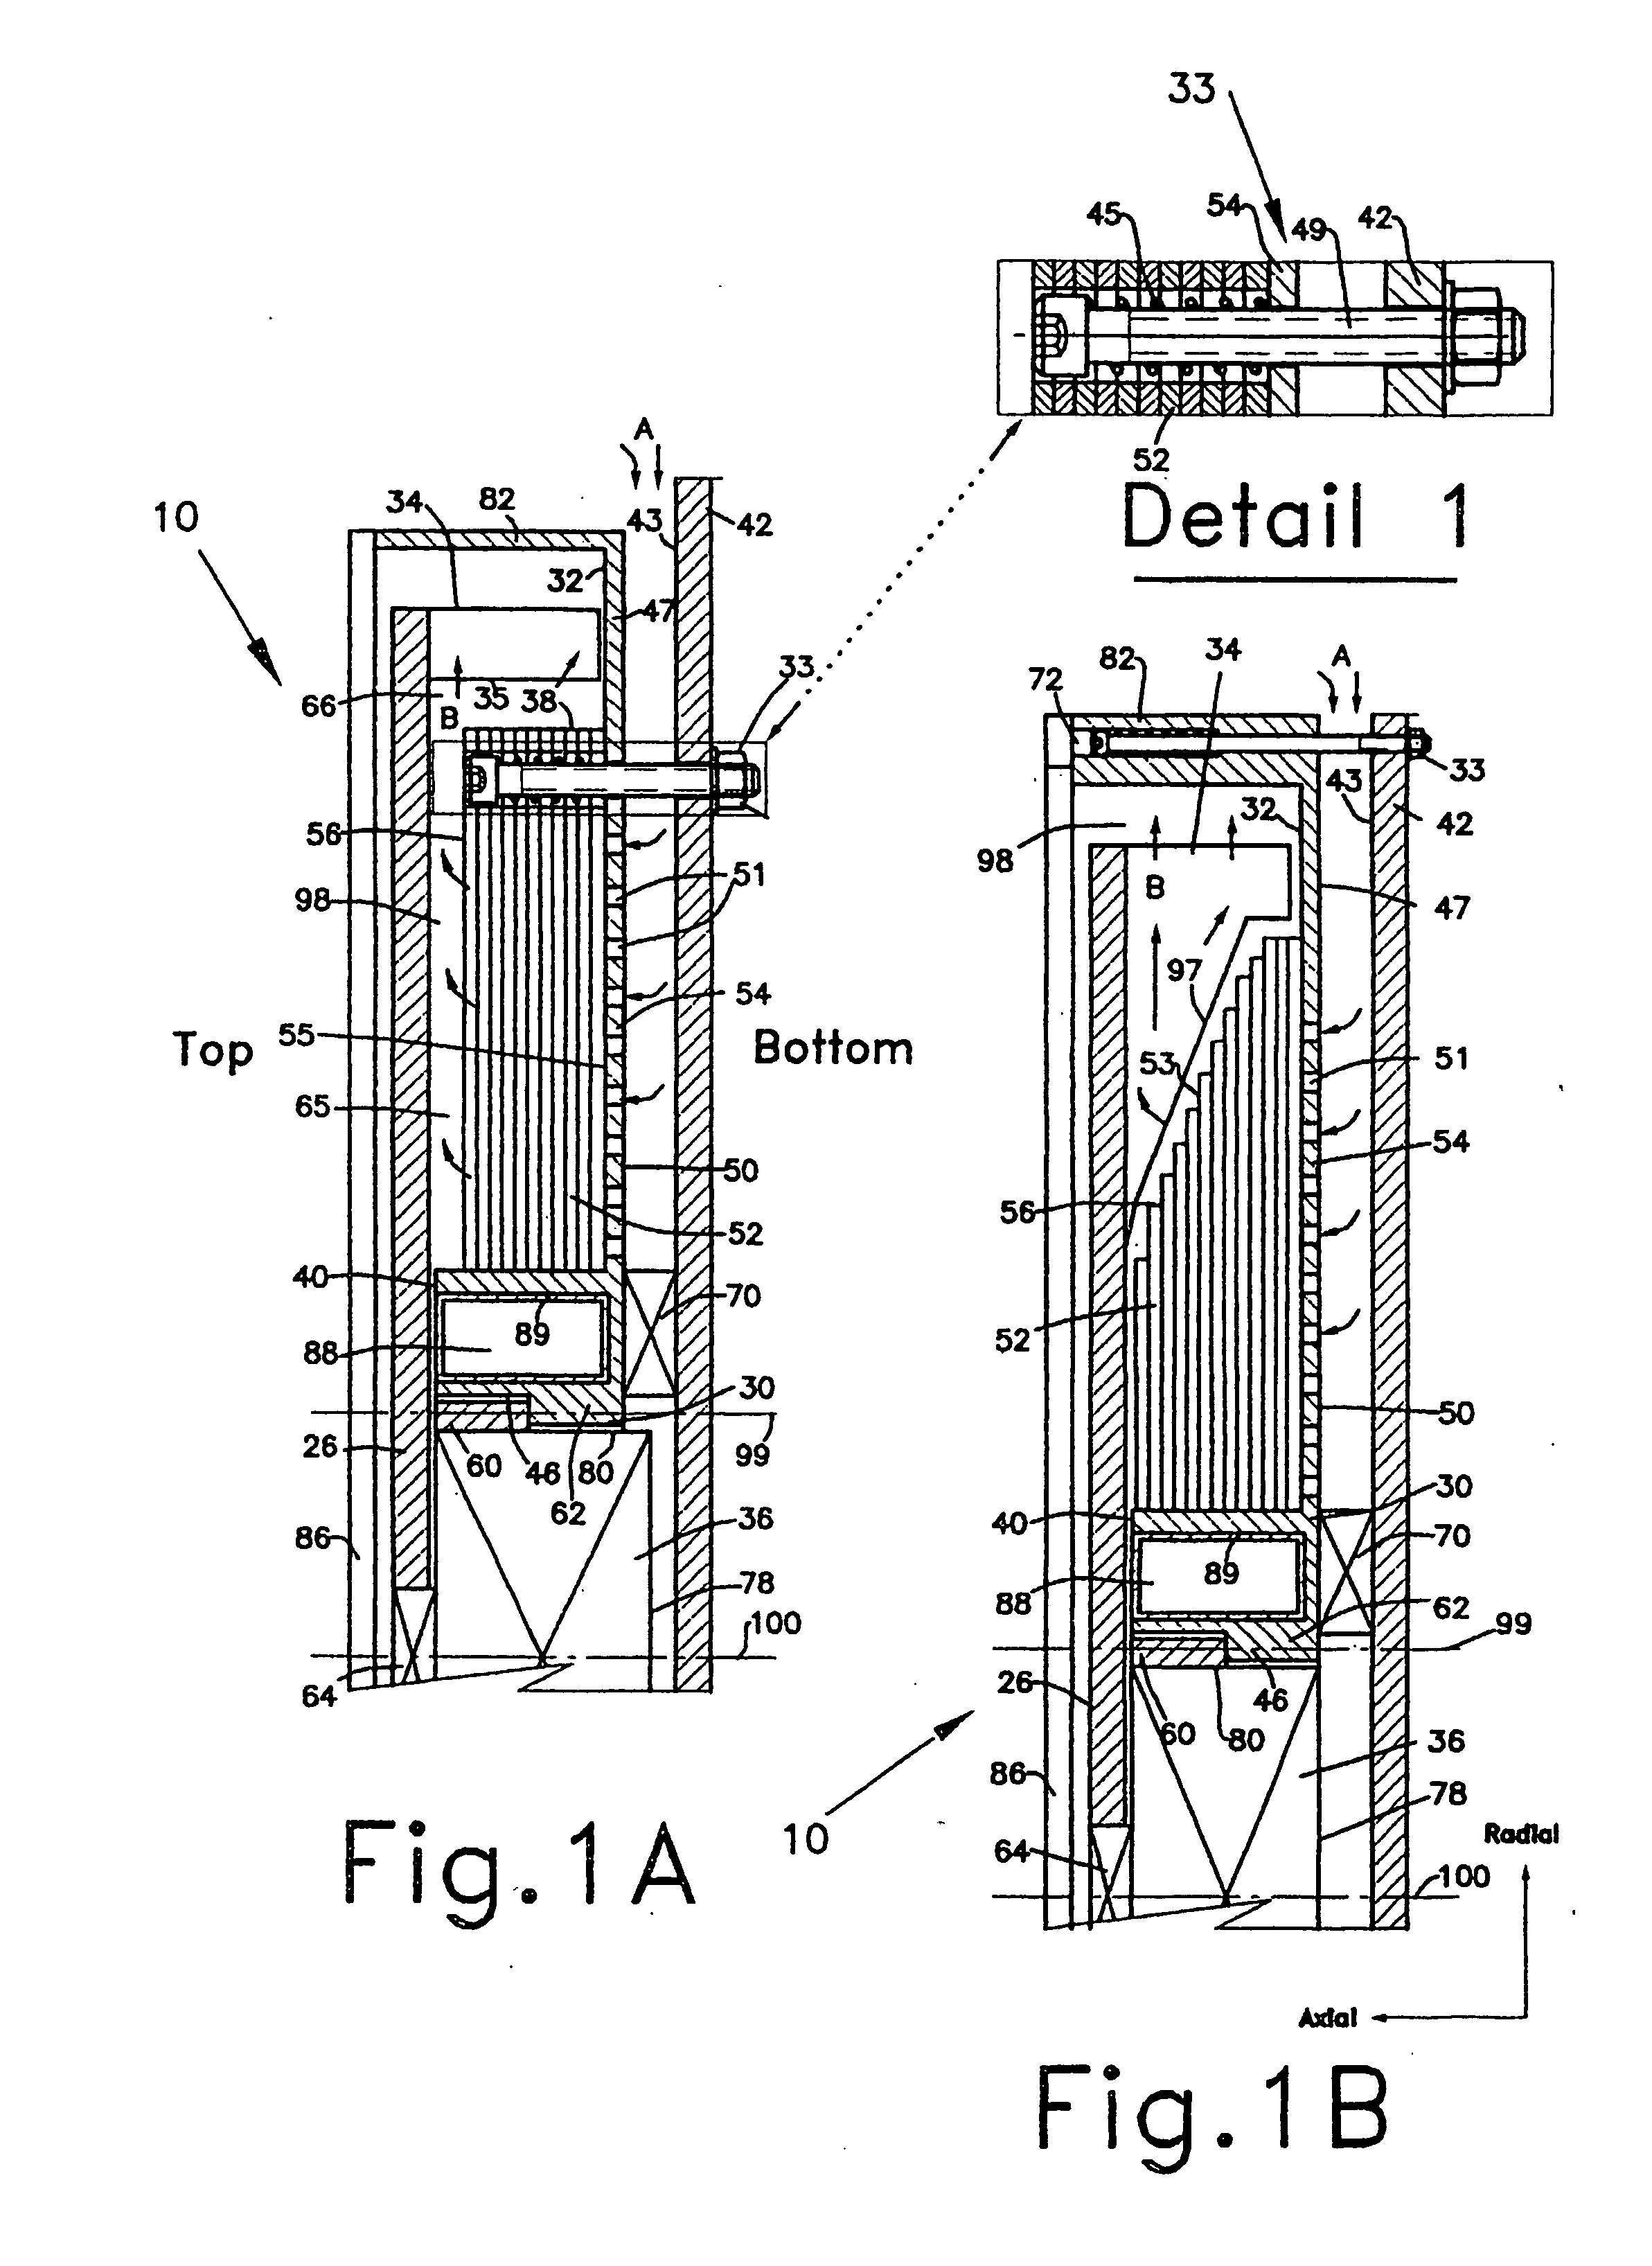 Heat-sink with large fins-to-air contact area